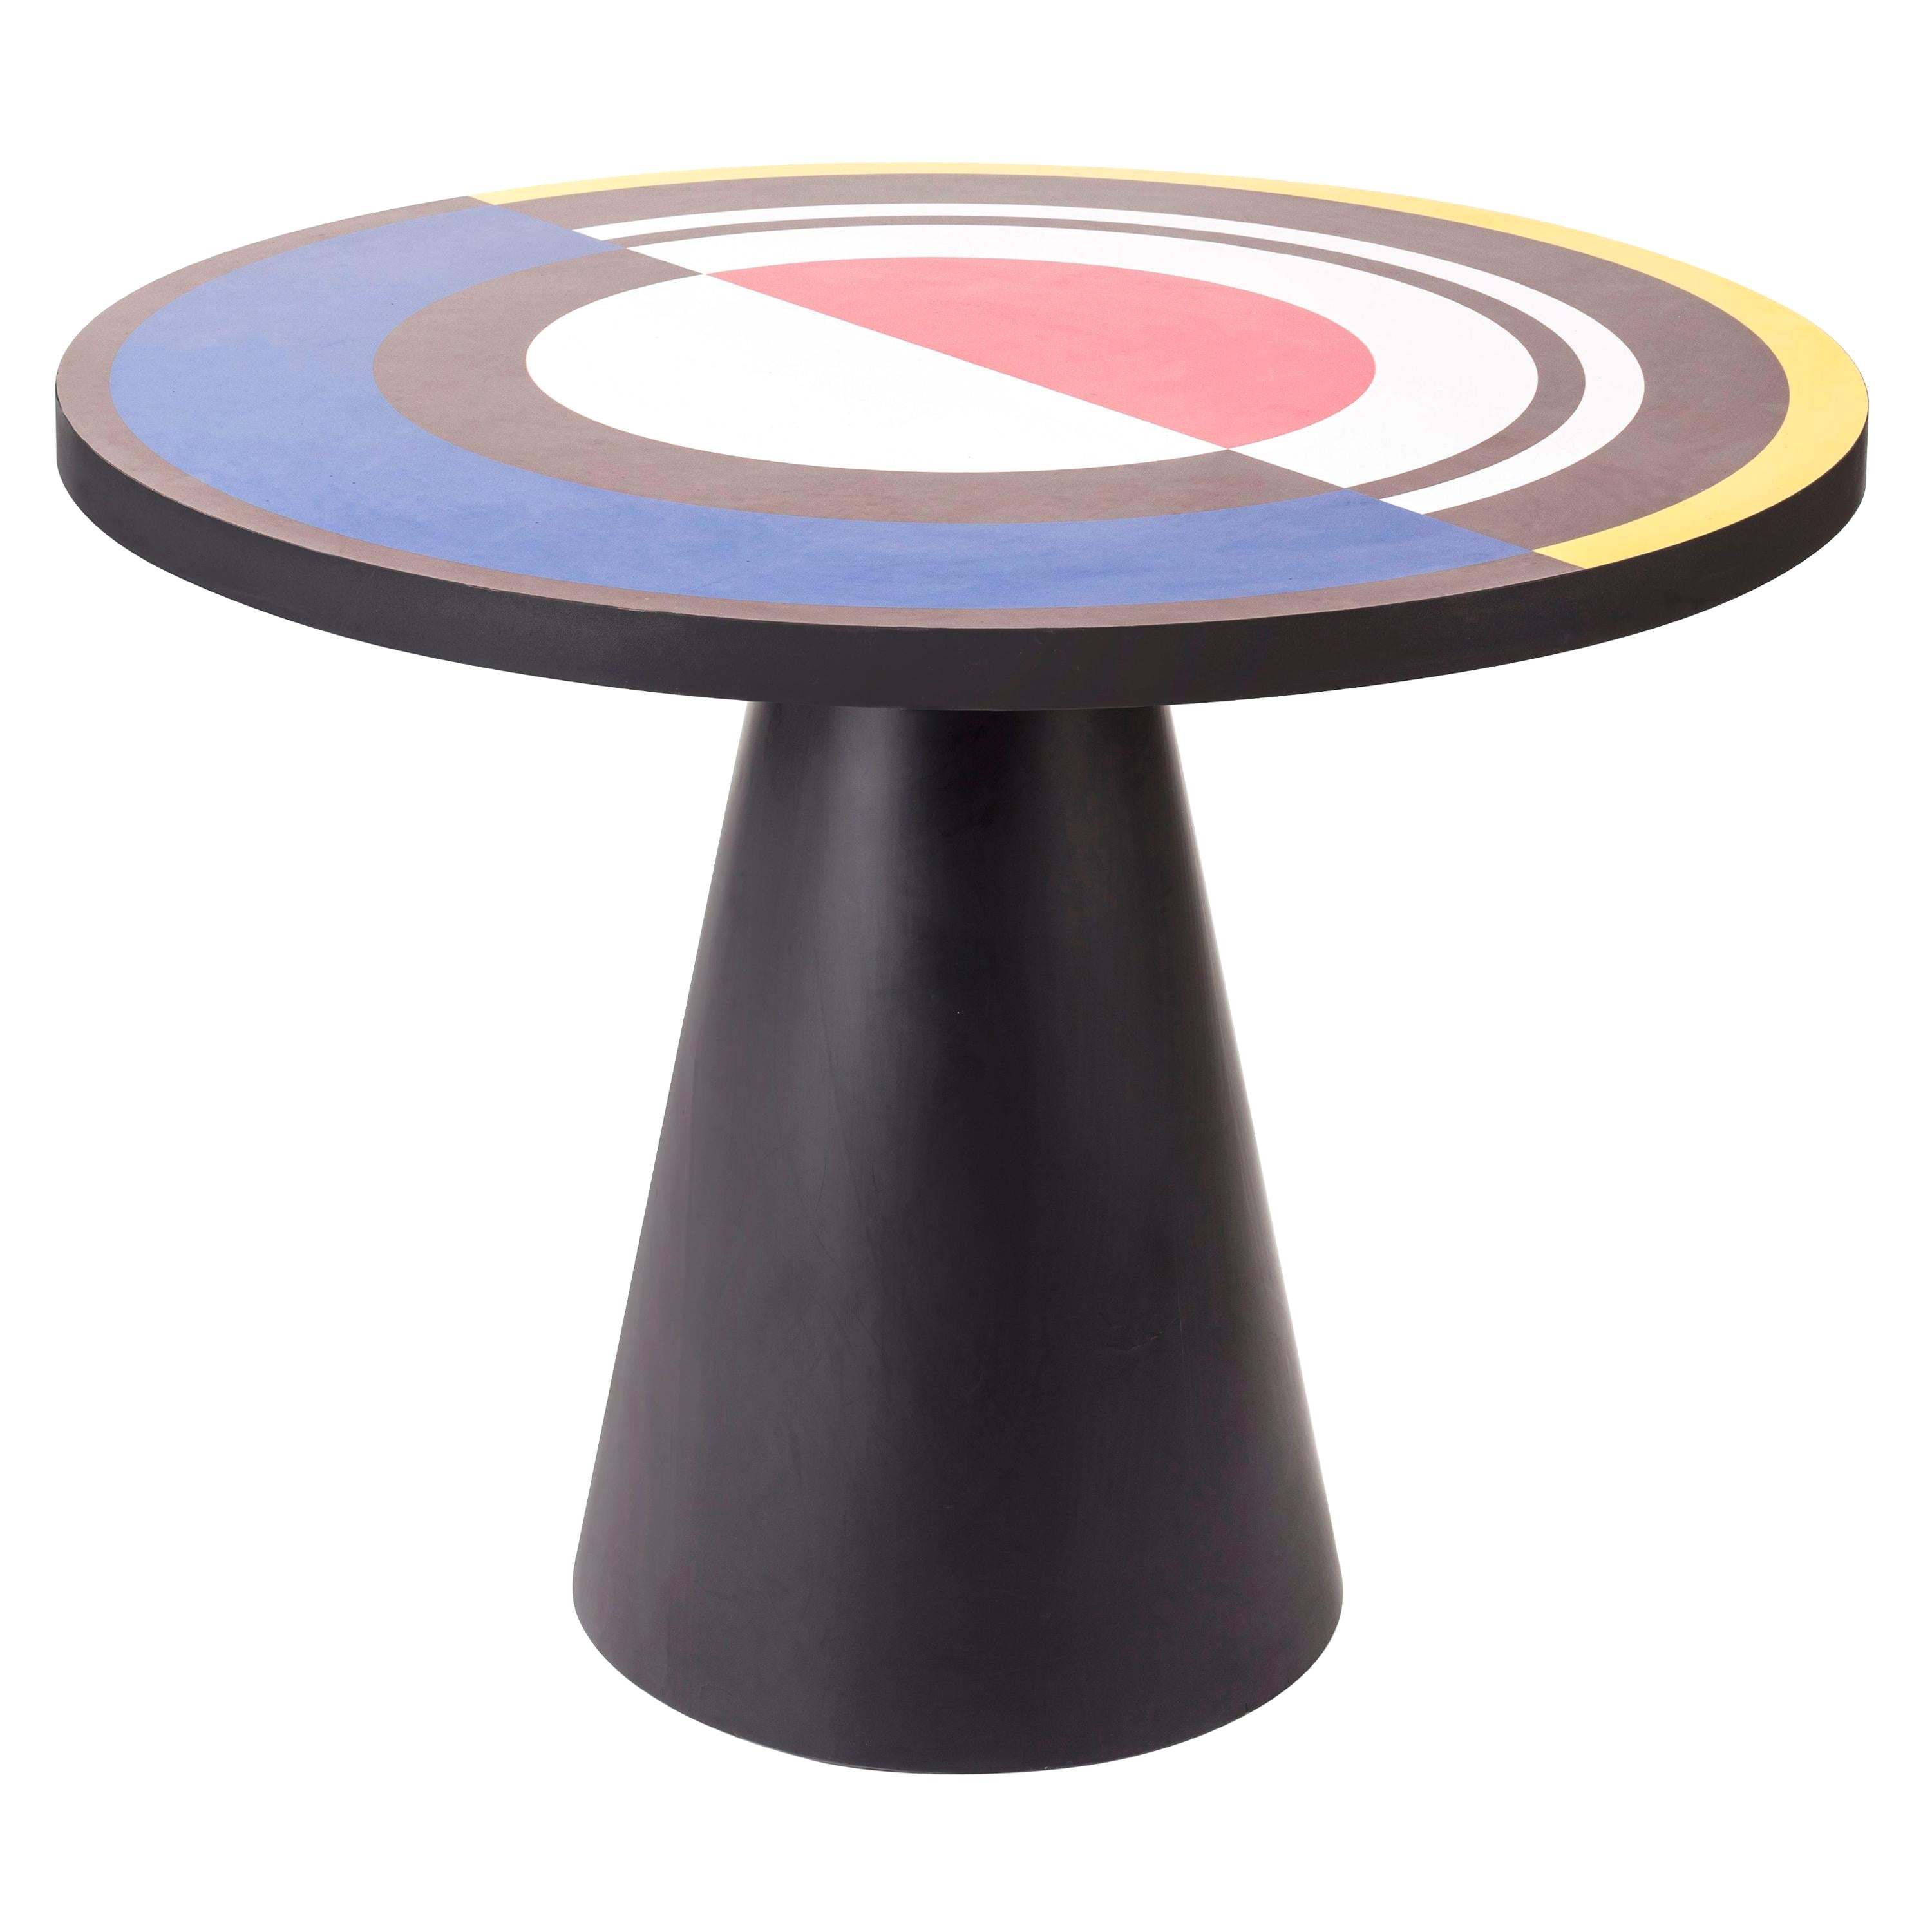 Homage to Delaunay Dining Table by Thomas Dariel